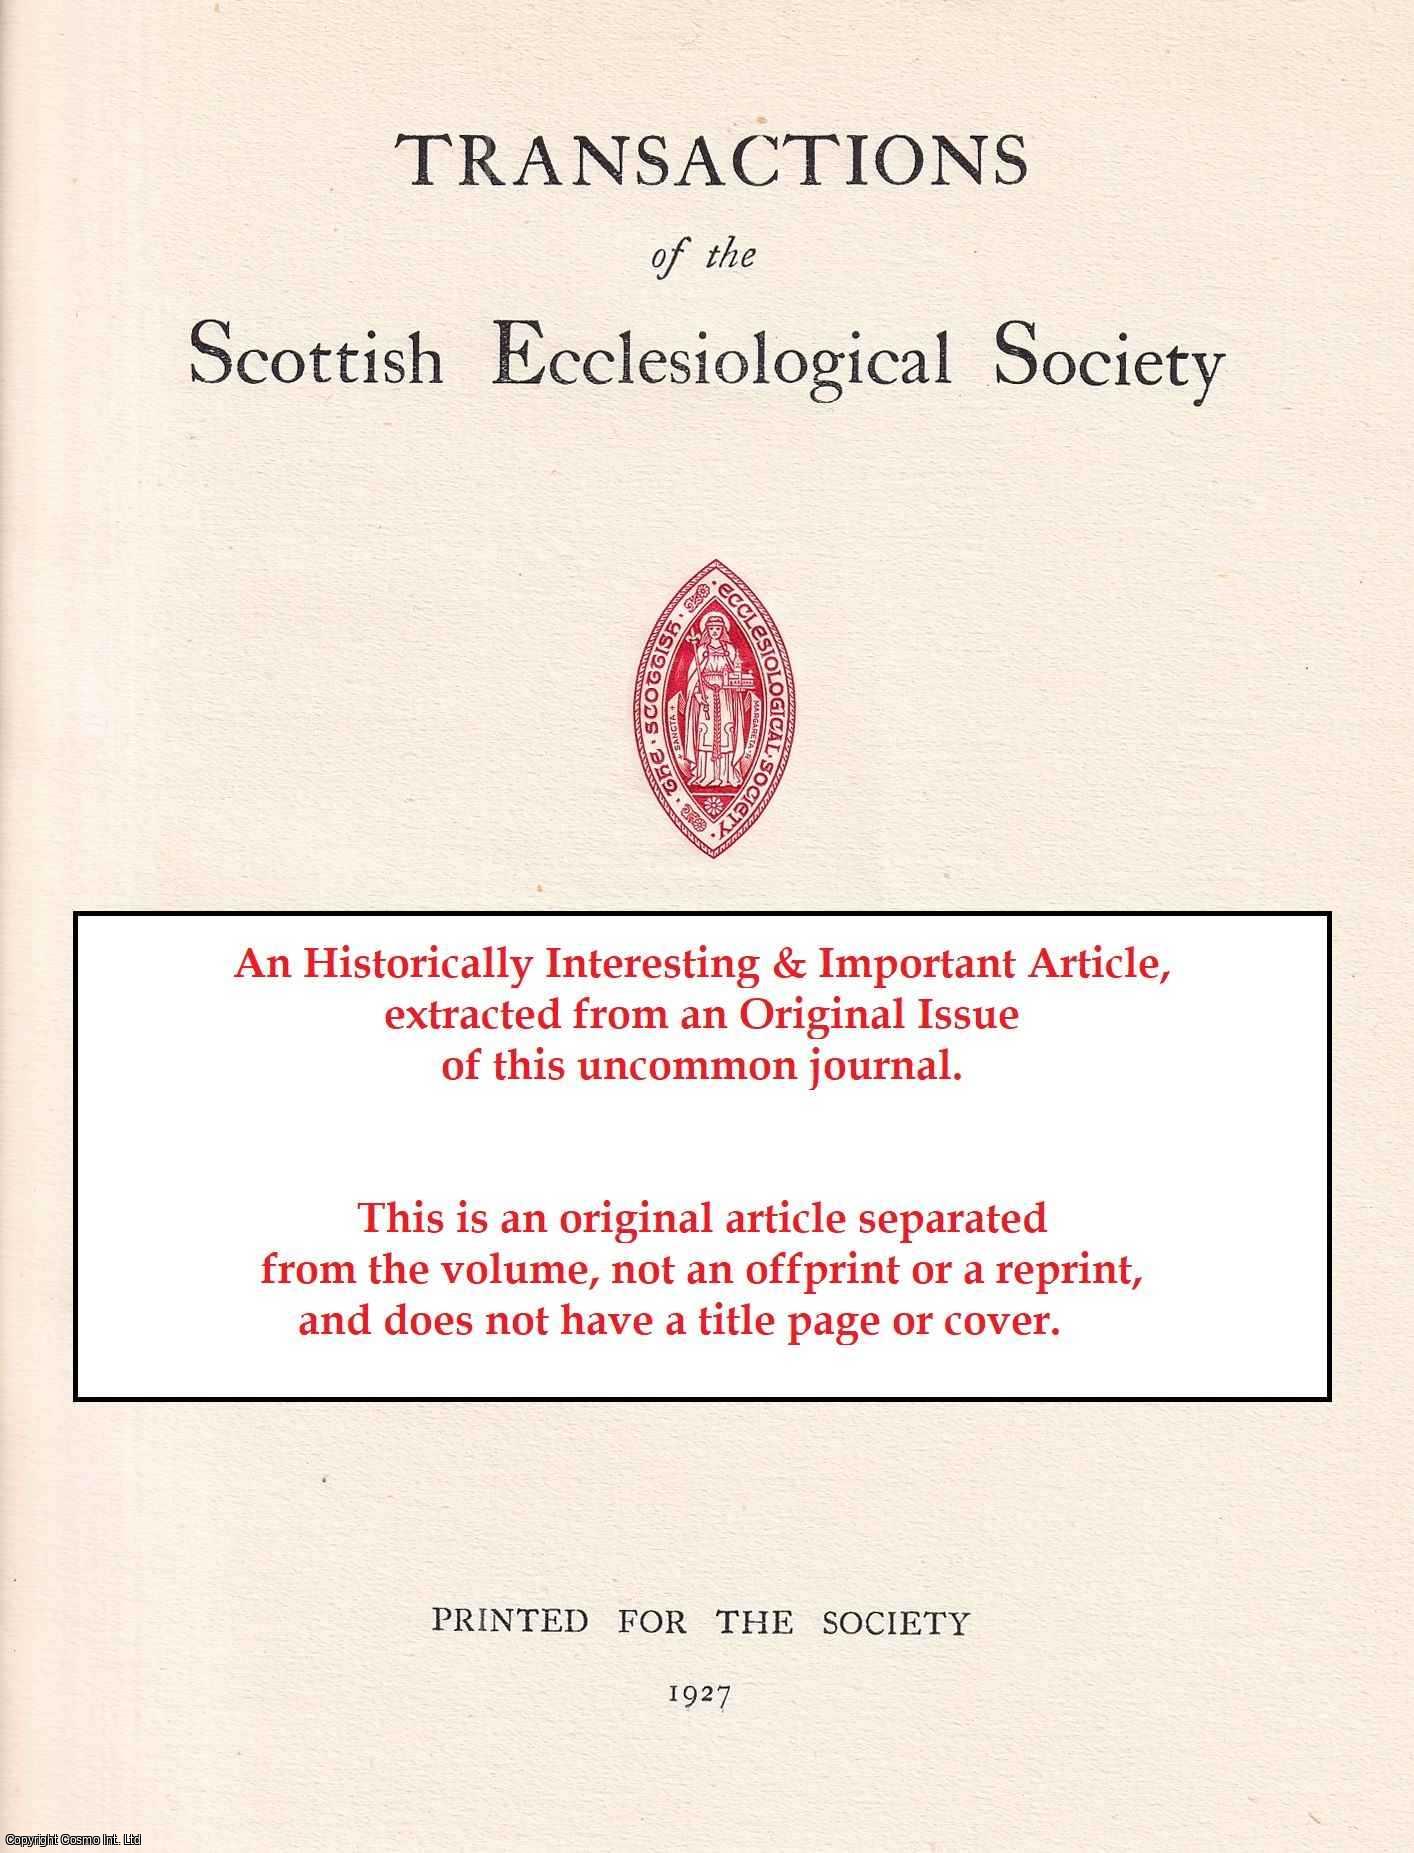 Rev James Cooper - The Doctrine and Ritual of the Offertory. An original article from the Transactions of the Aberdeen Ecclesiological Society, 1901.